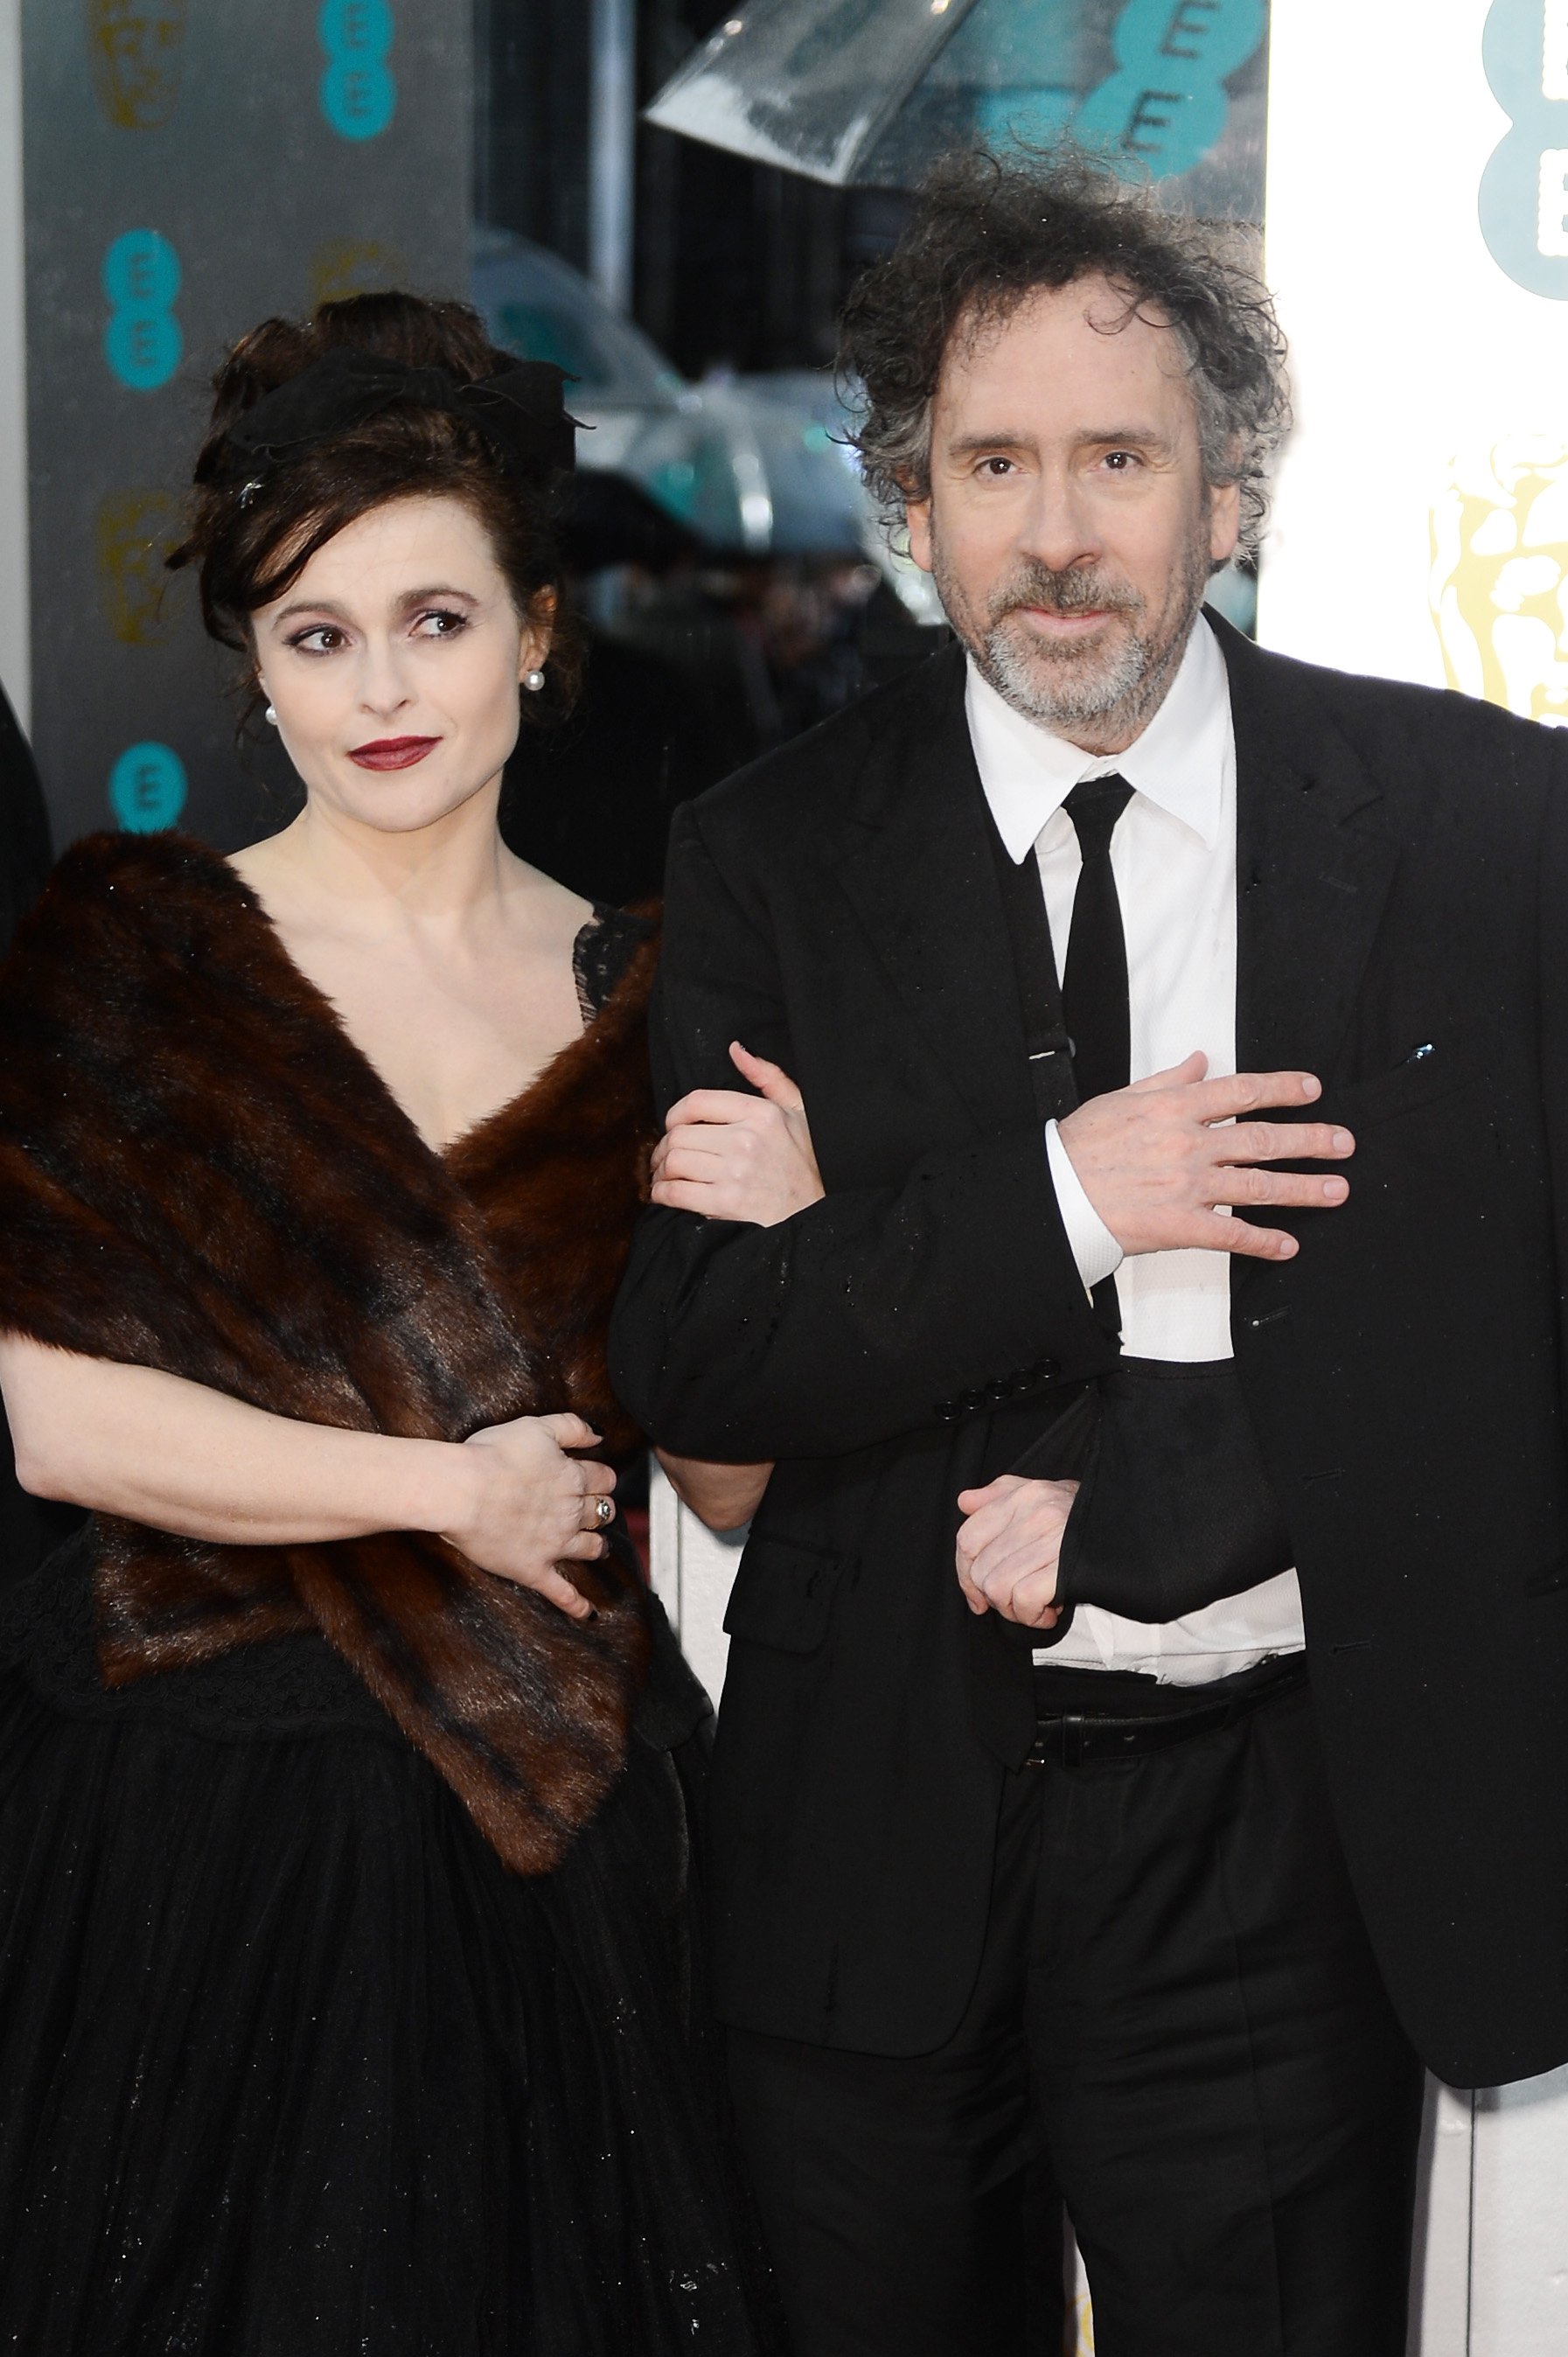 Helena Bonham Carter and Tim Burton attend the EE British Academy Film Awards at The Royal Opera House on February 10, 2013, in London, England. | Source: Getty Images